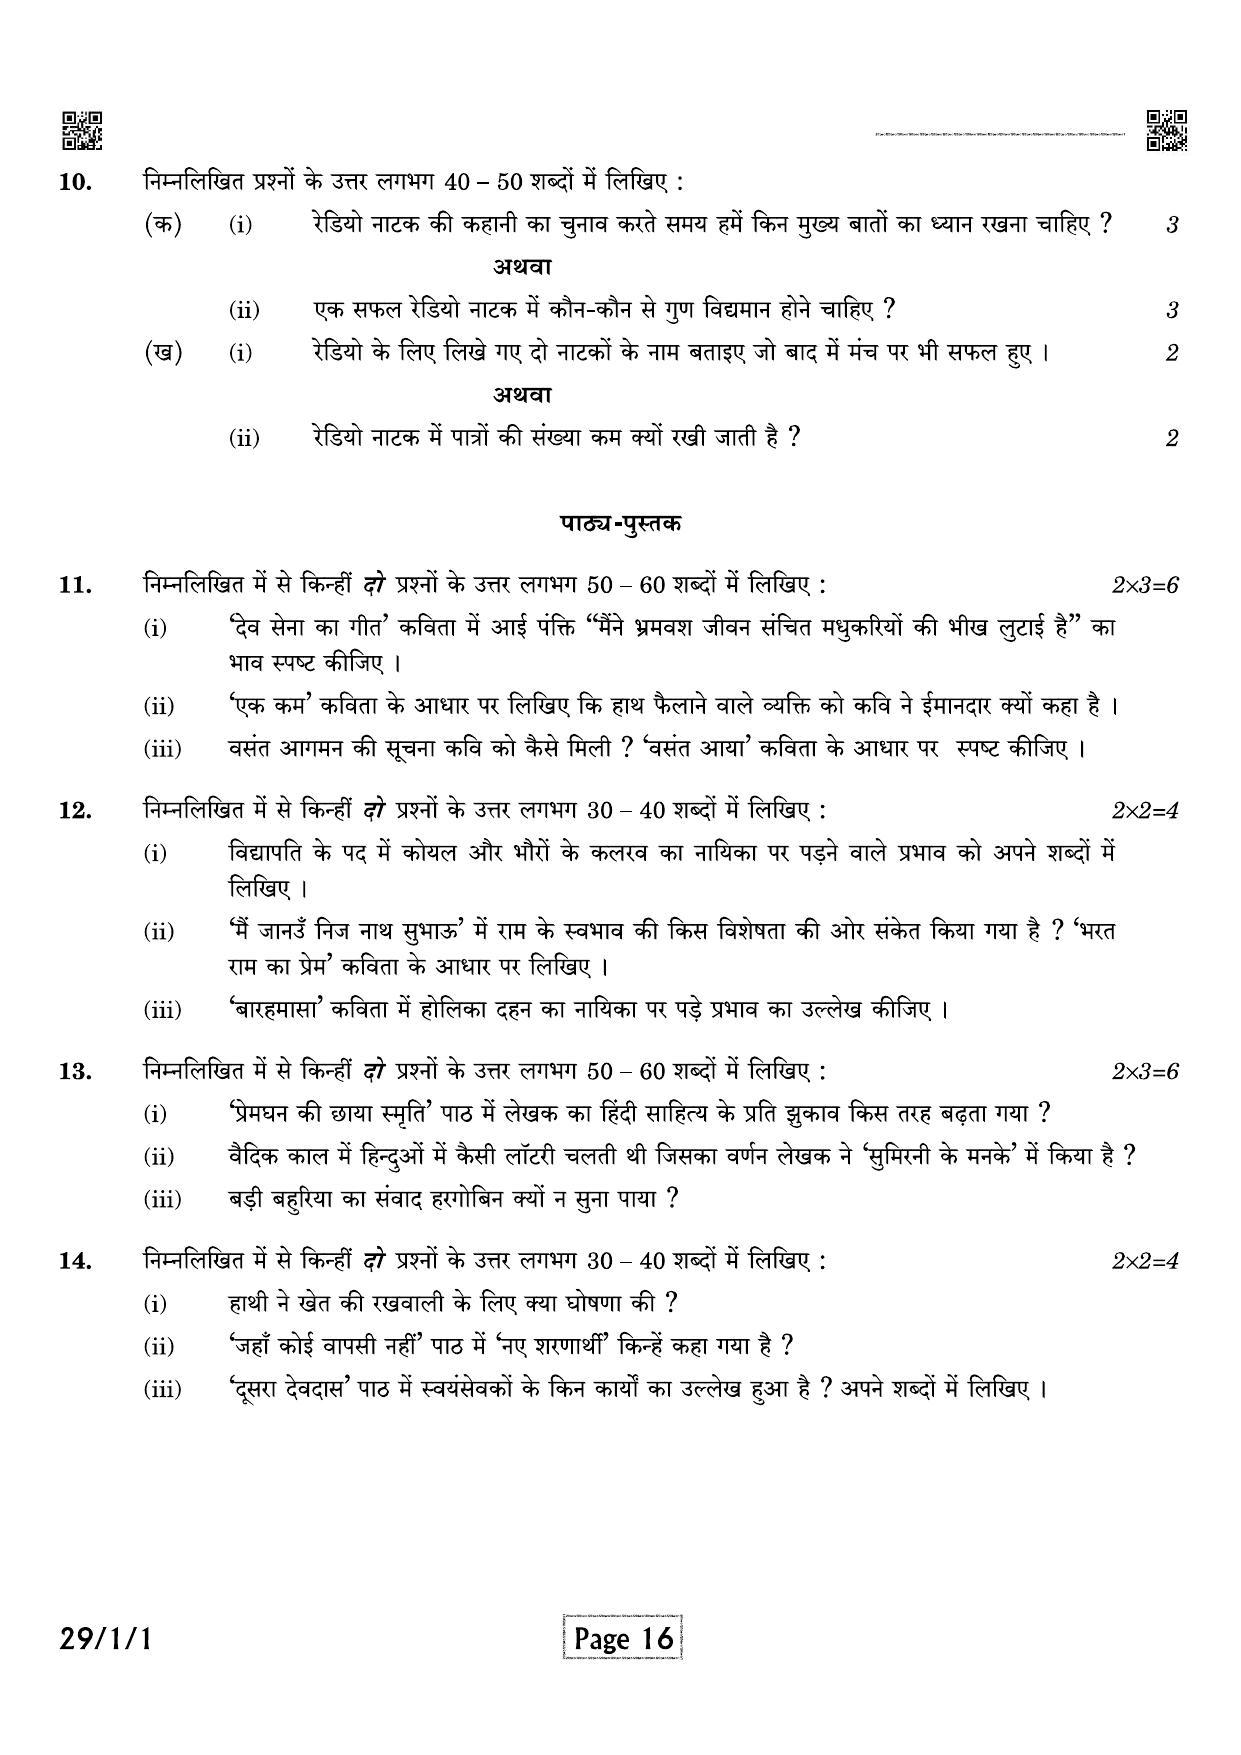 CBSE Class 12 QP_002_HINDI_ELECTIVE 2021 Compartment Question Paper - Page 16